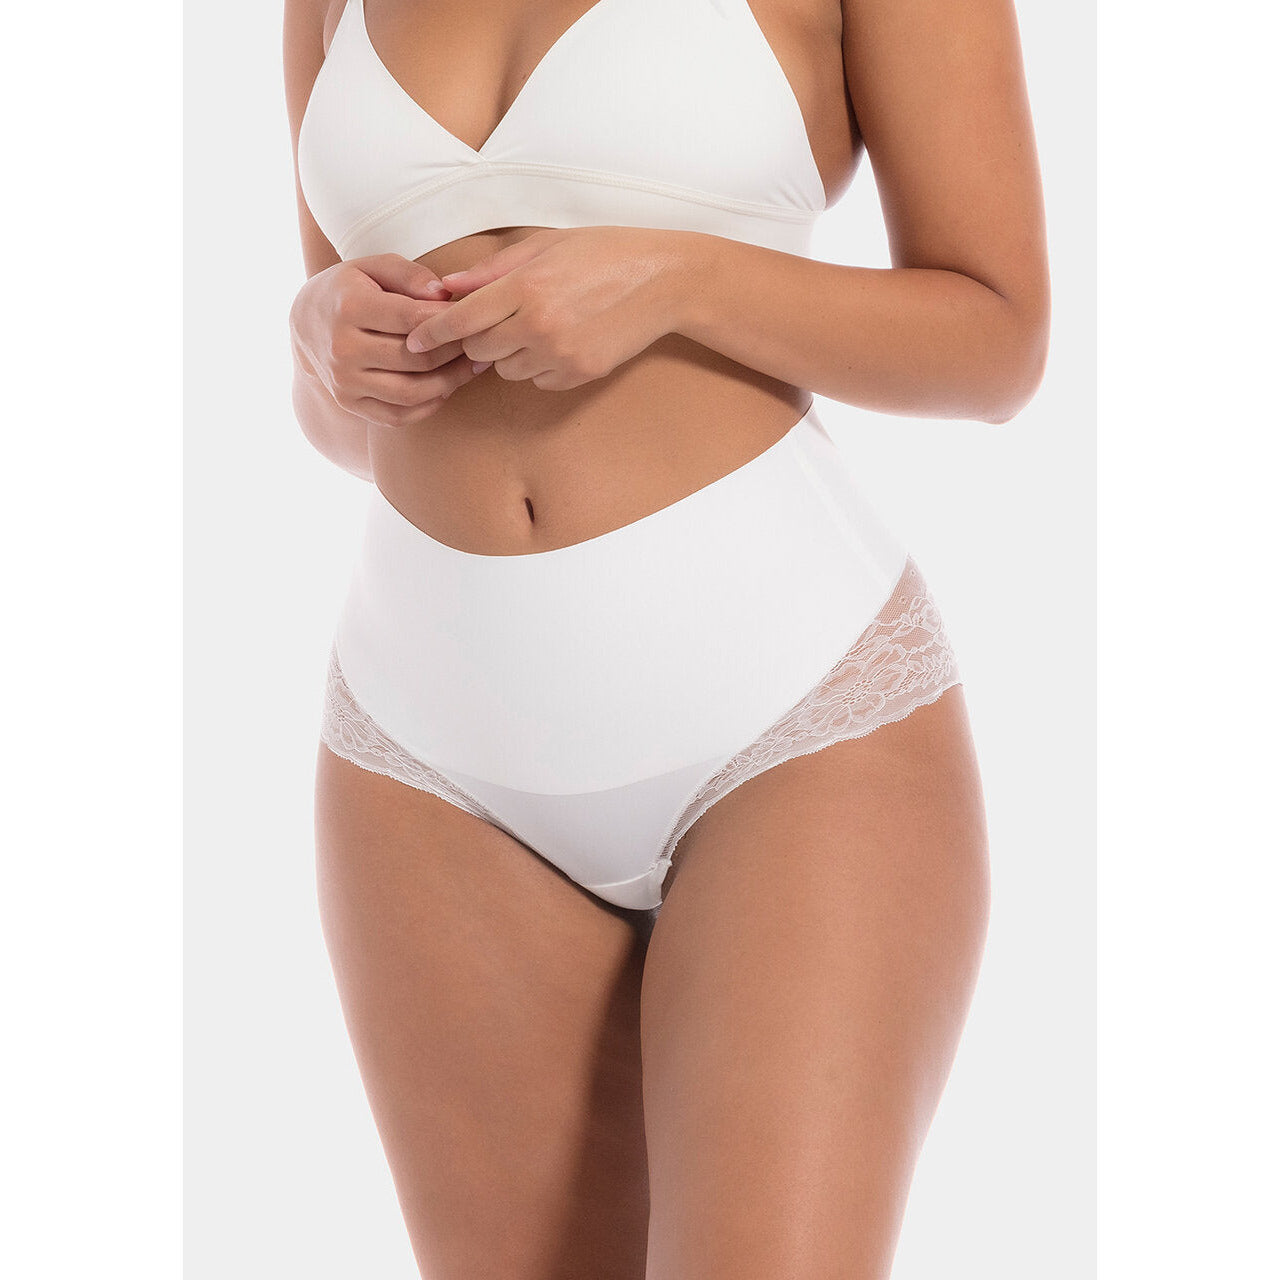 Lace Tummy Slimmer – The Lady's Slip